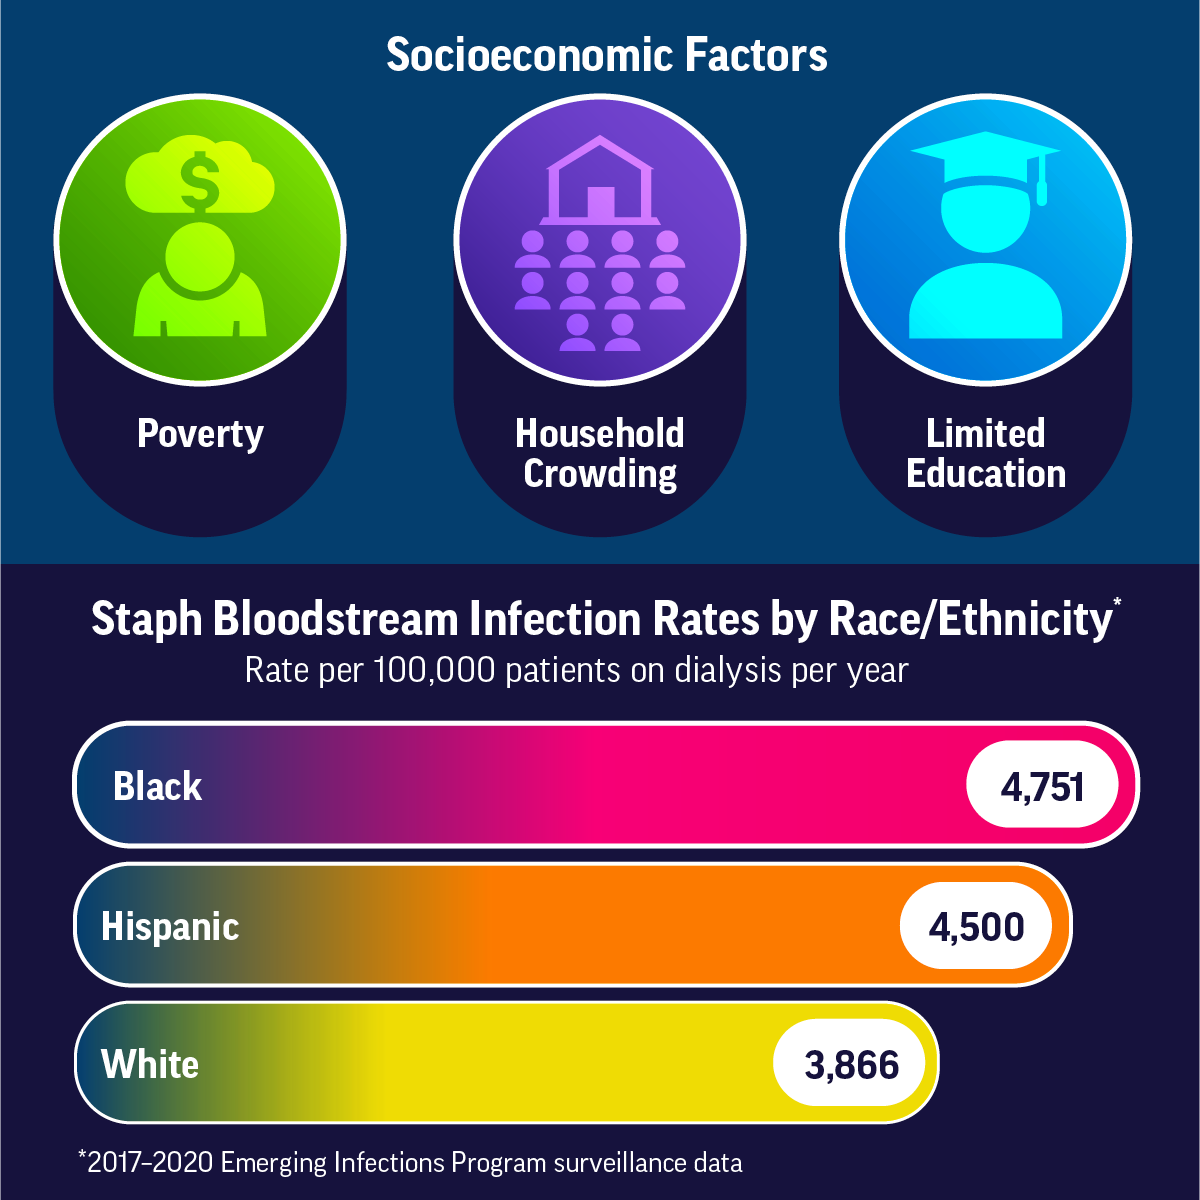 Infographic 2: Inequities Can Lead to More Staph Bloodstream Infections